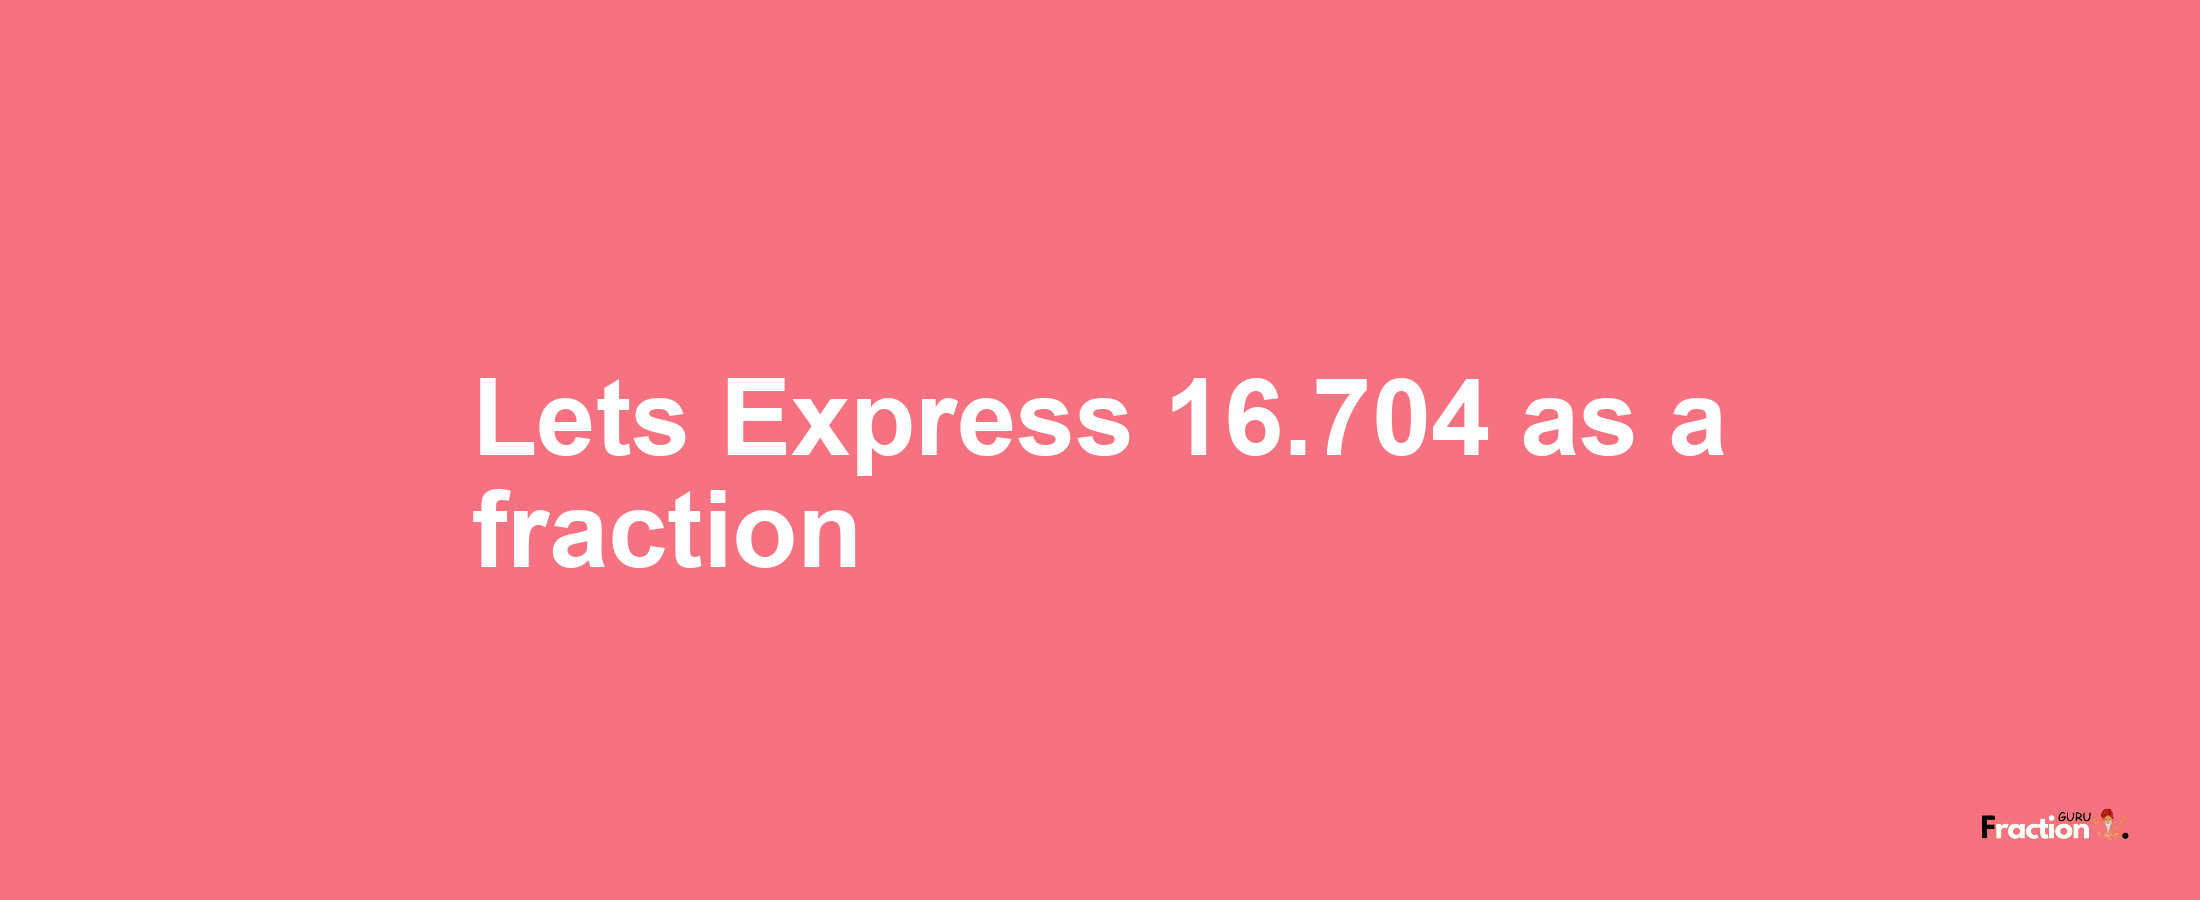 Lets Express 16.704 as afraction